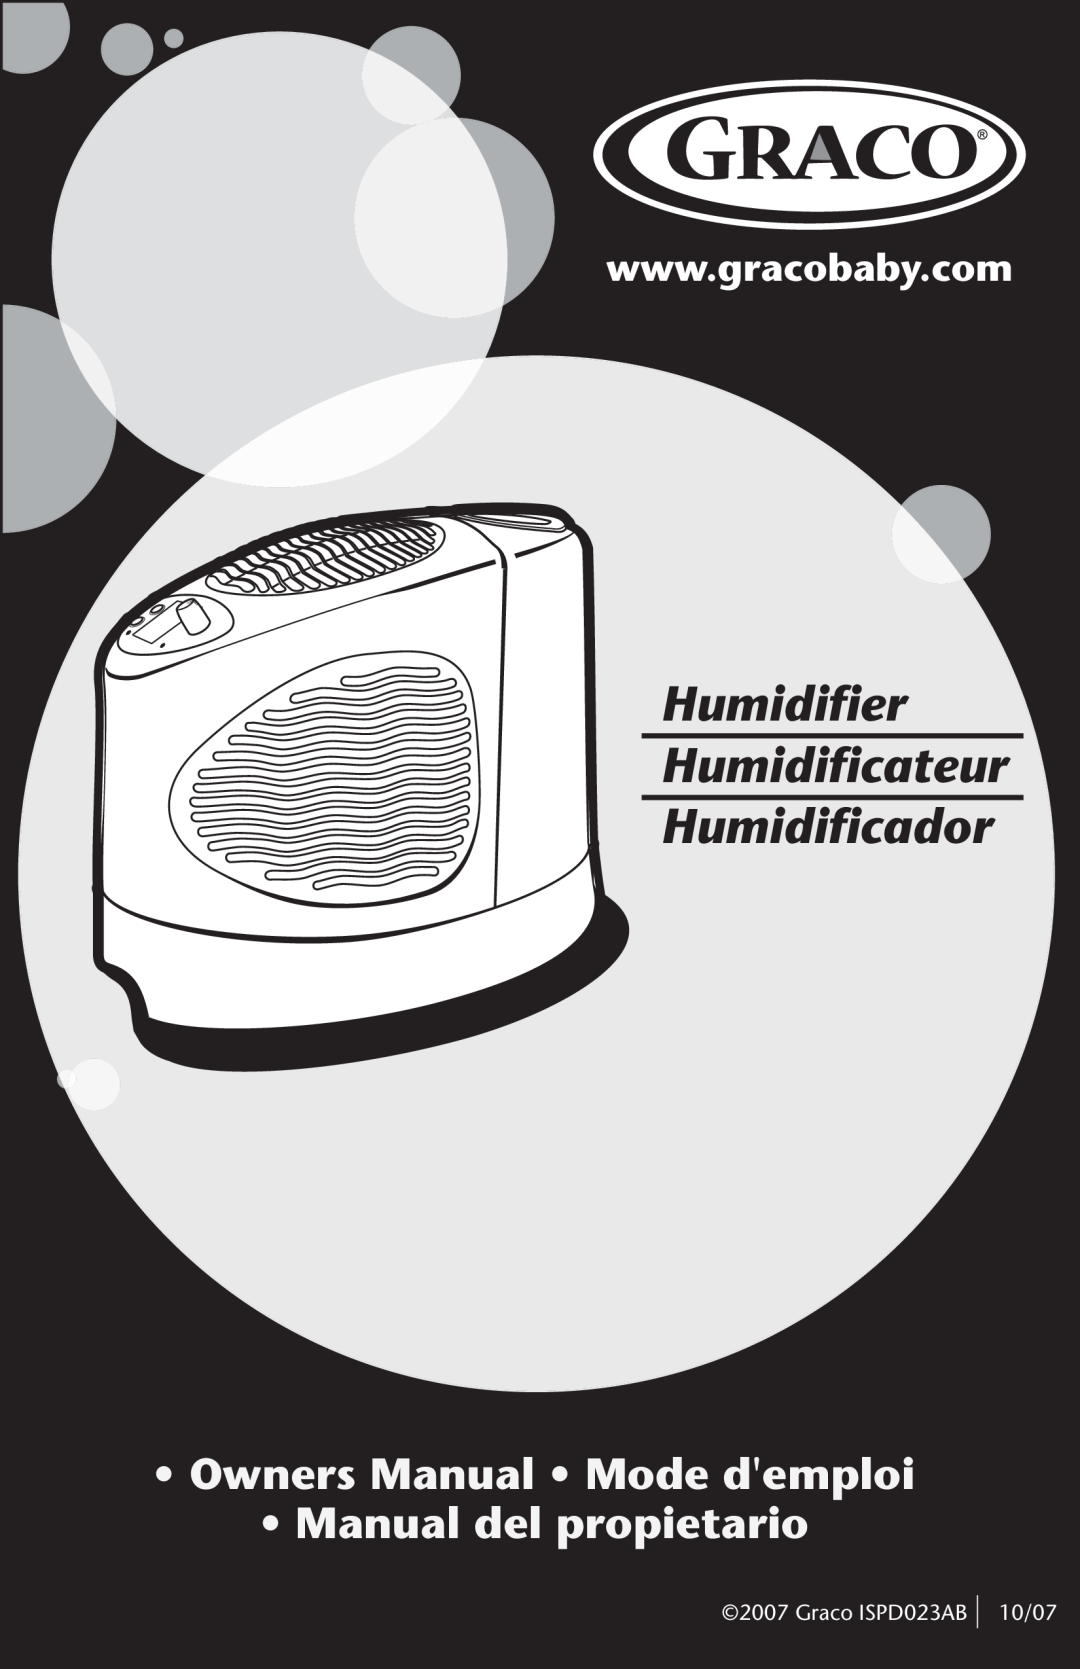 Graco owner manual Humidifier Humidificateur Humidificador, •Owners Manual • Mode demploi, Graco ISPD023AB 10/07 